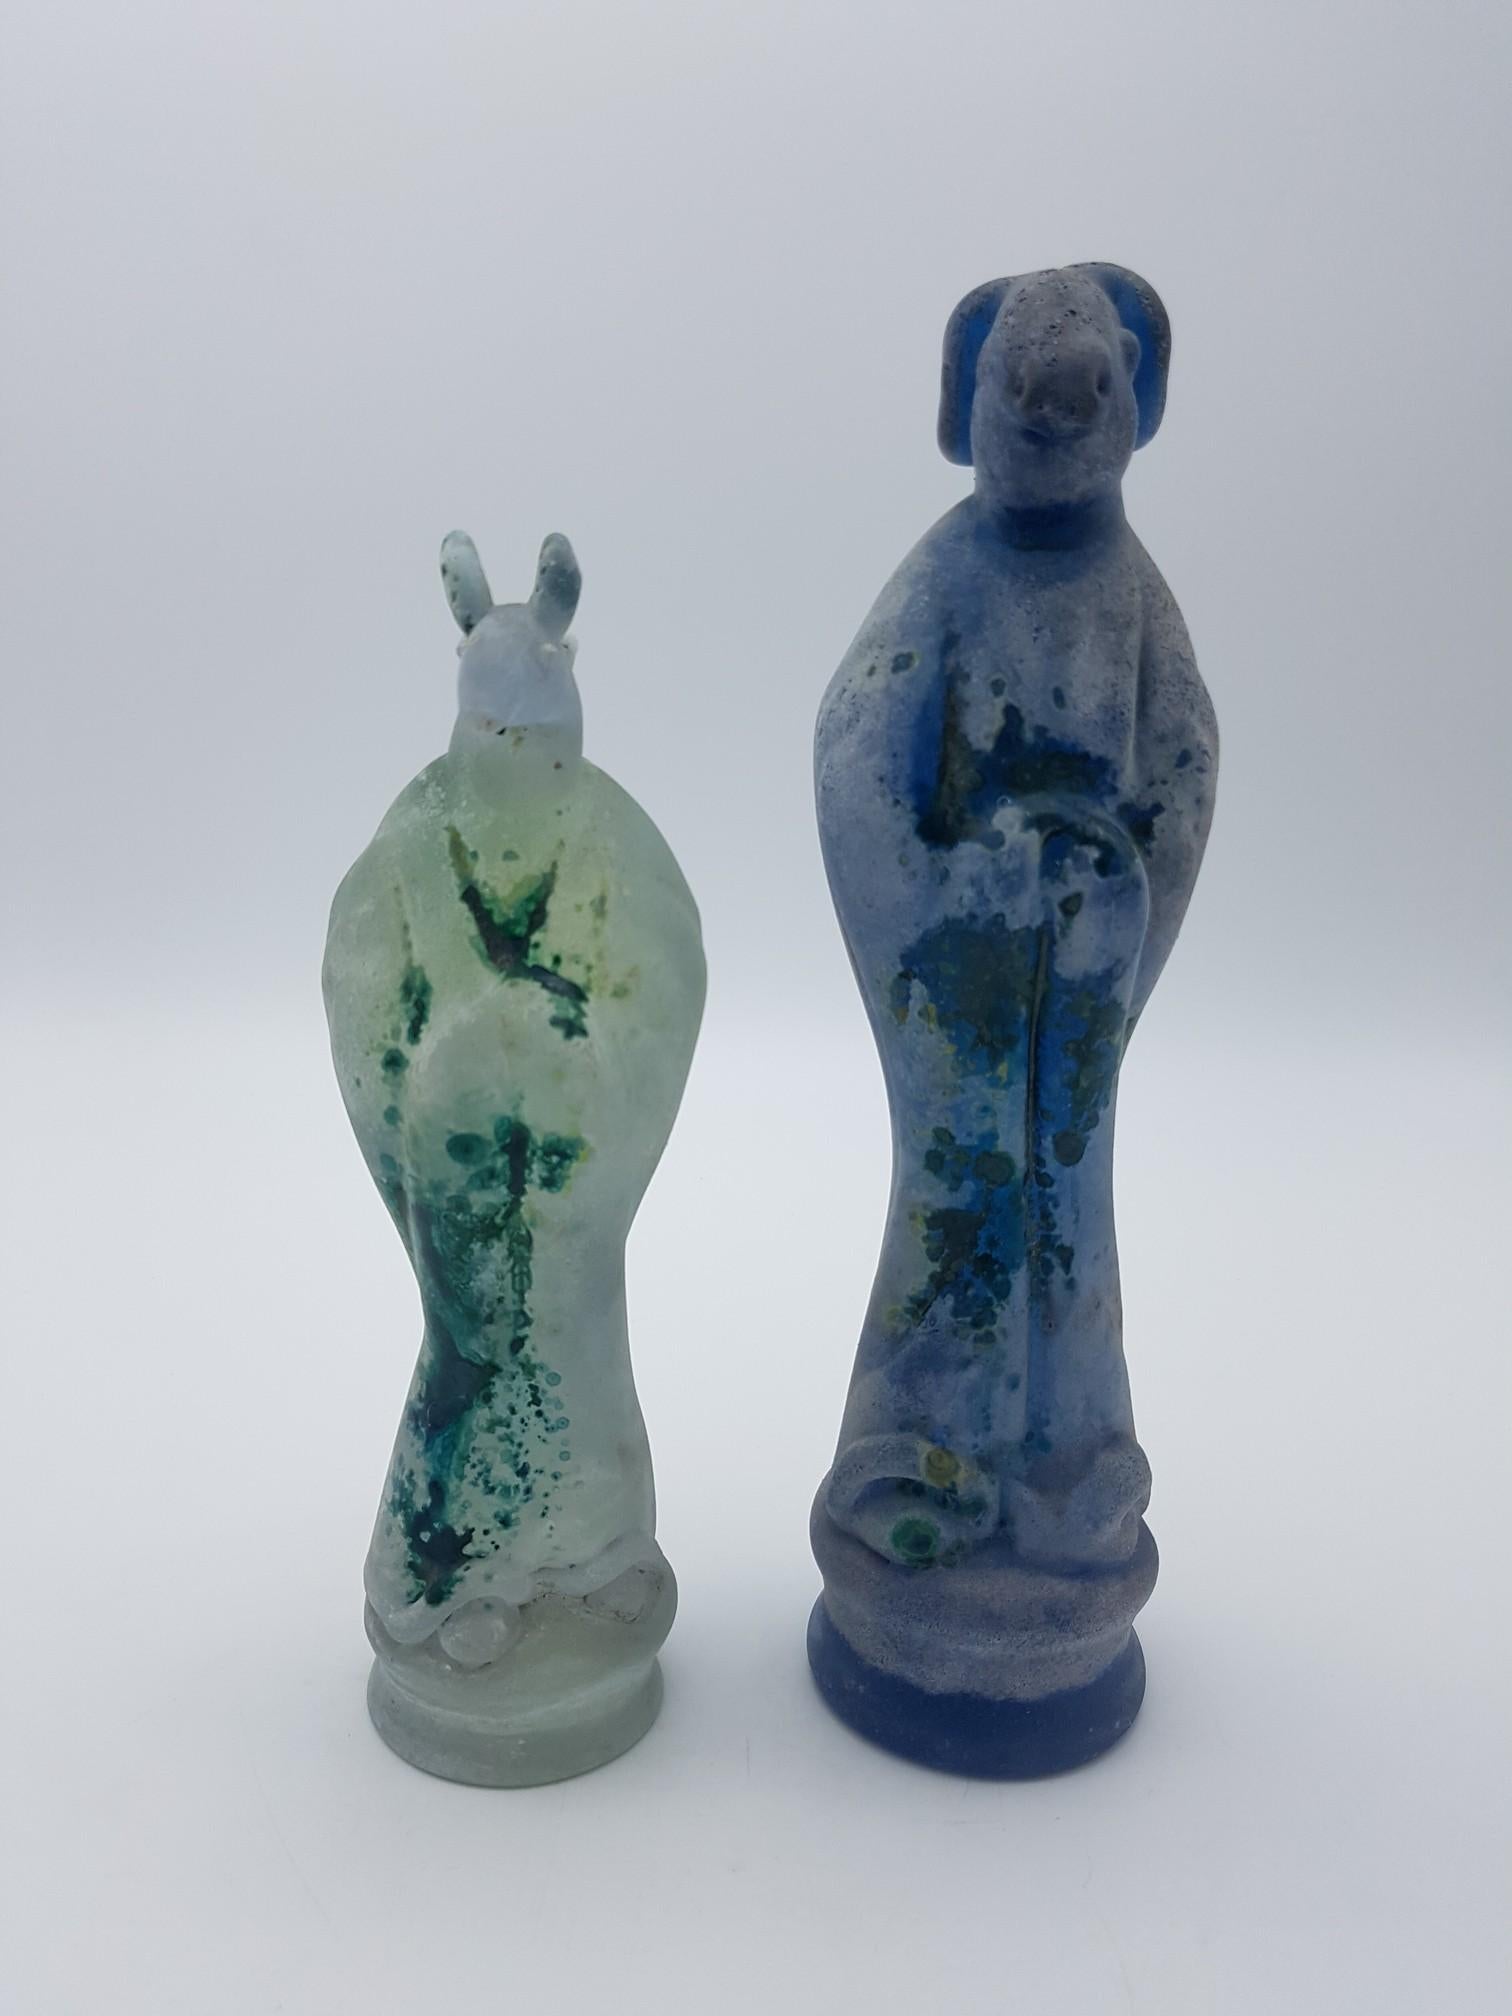 This rare vintage pair of Murano glass figurines were handmade by the glass-master Ermanno Nason at Gino Cenedese e Figlio glass factiory in the late 1960s. The two zoomprphic figurines are part of the vast and polyhedral production of Mr. Nason: